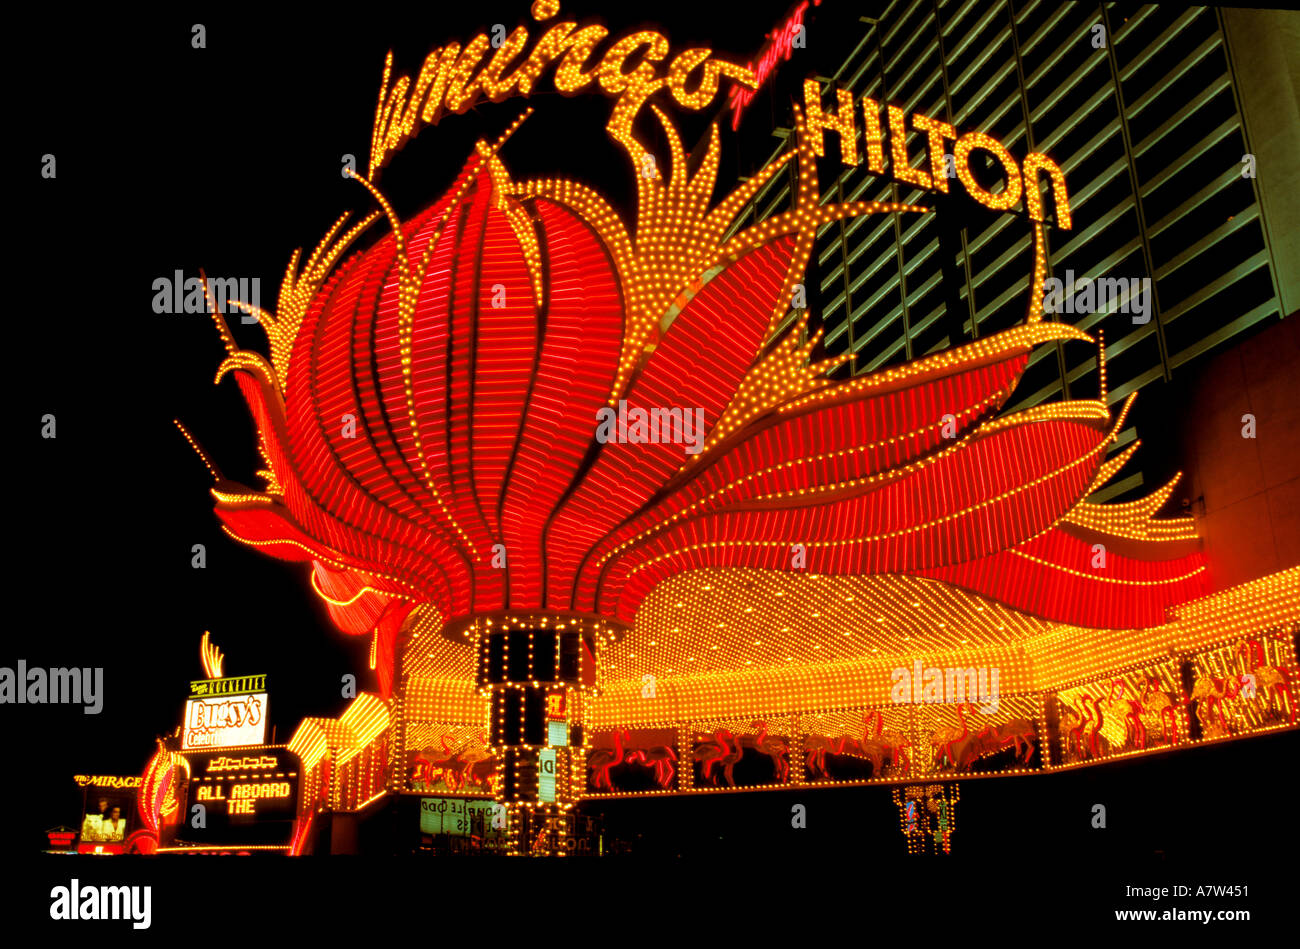 The Flamingo Hotel in Las Vegas NV is a blaze of neon and tungsten lights Stock Photo